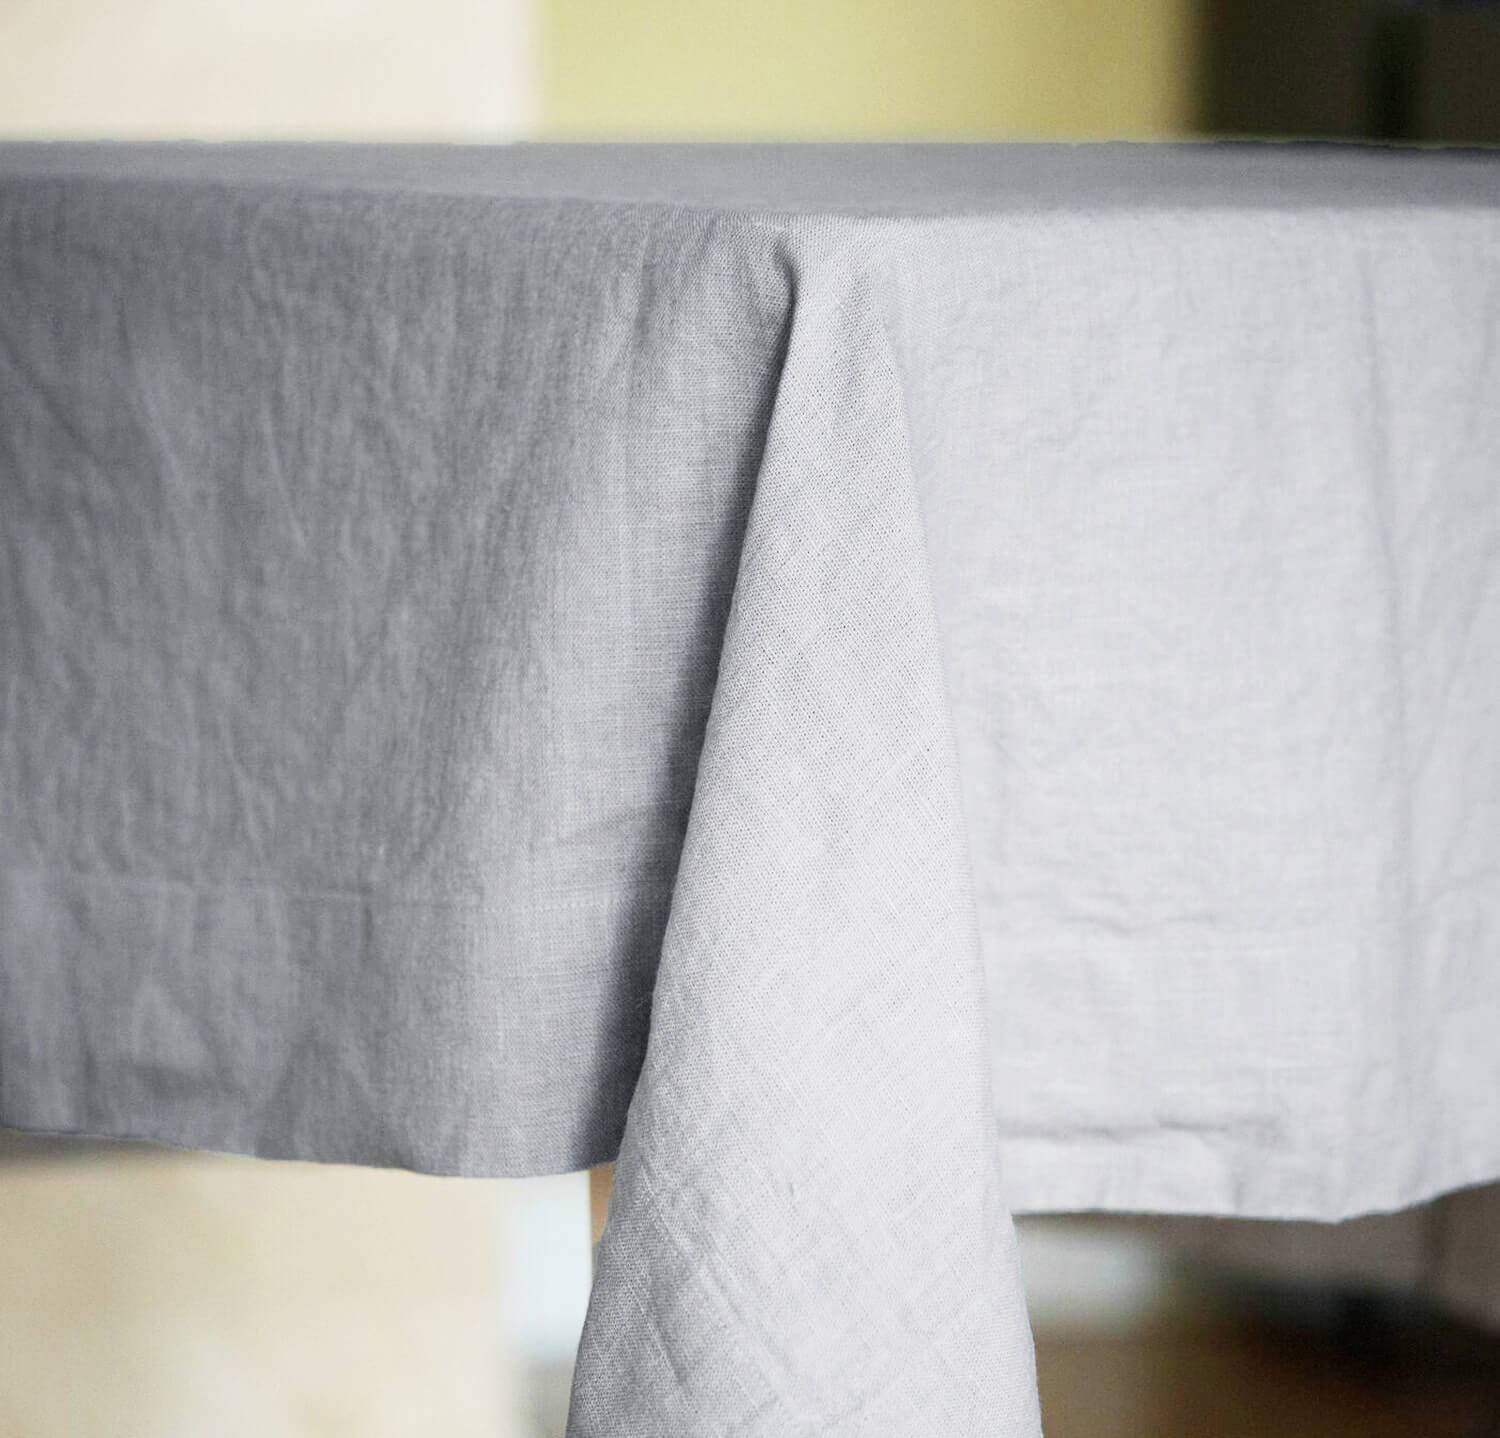 where is linen tablecloth located